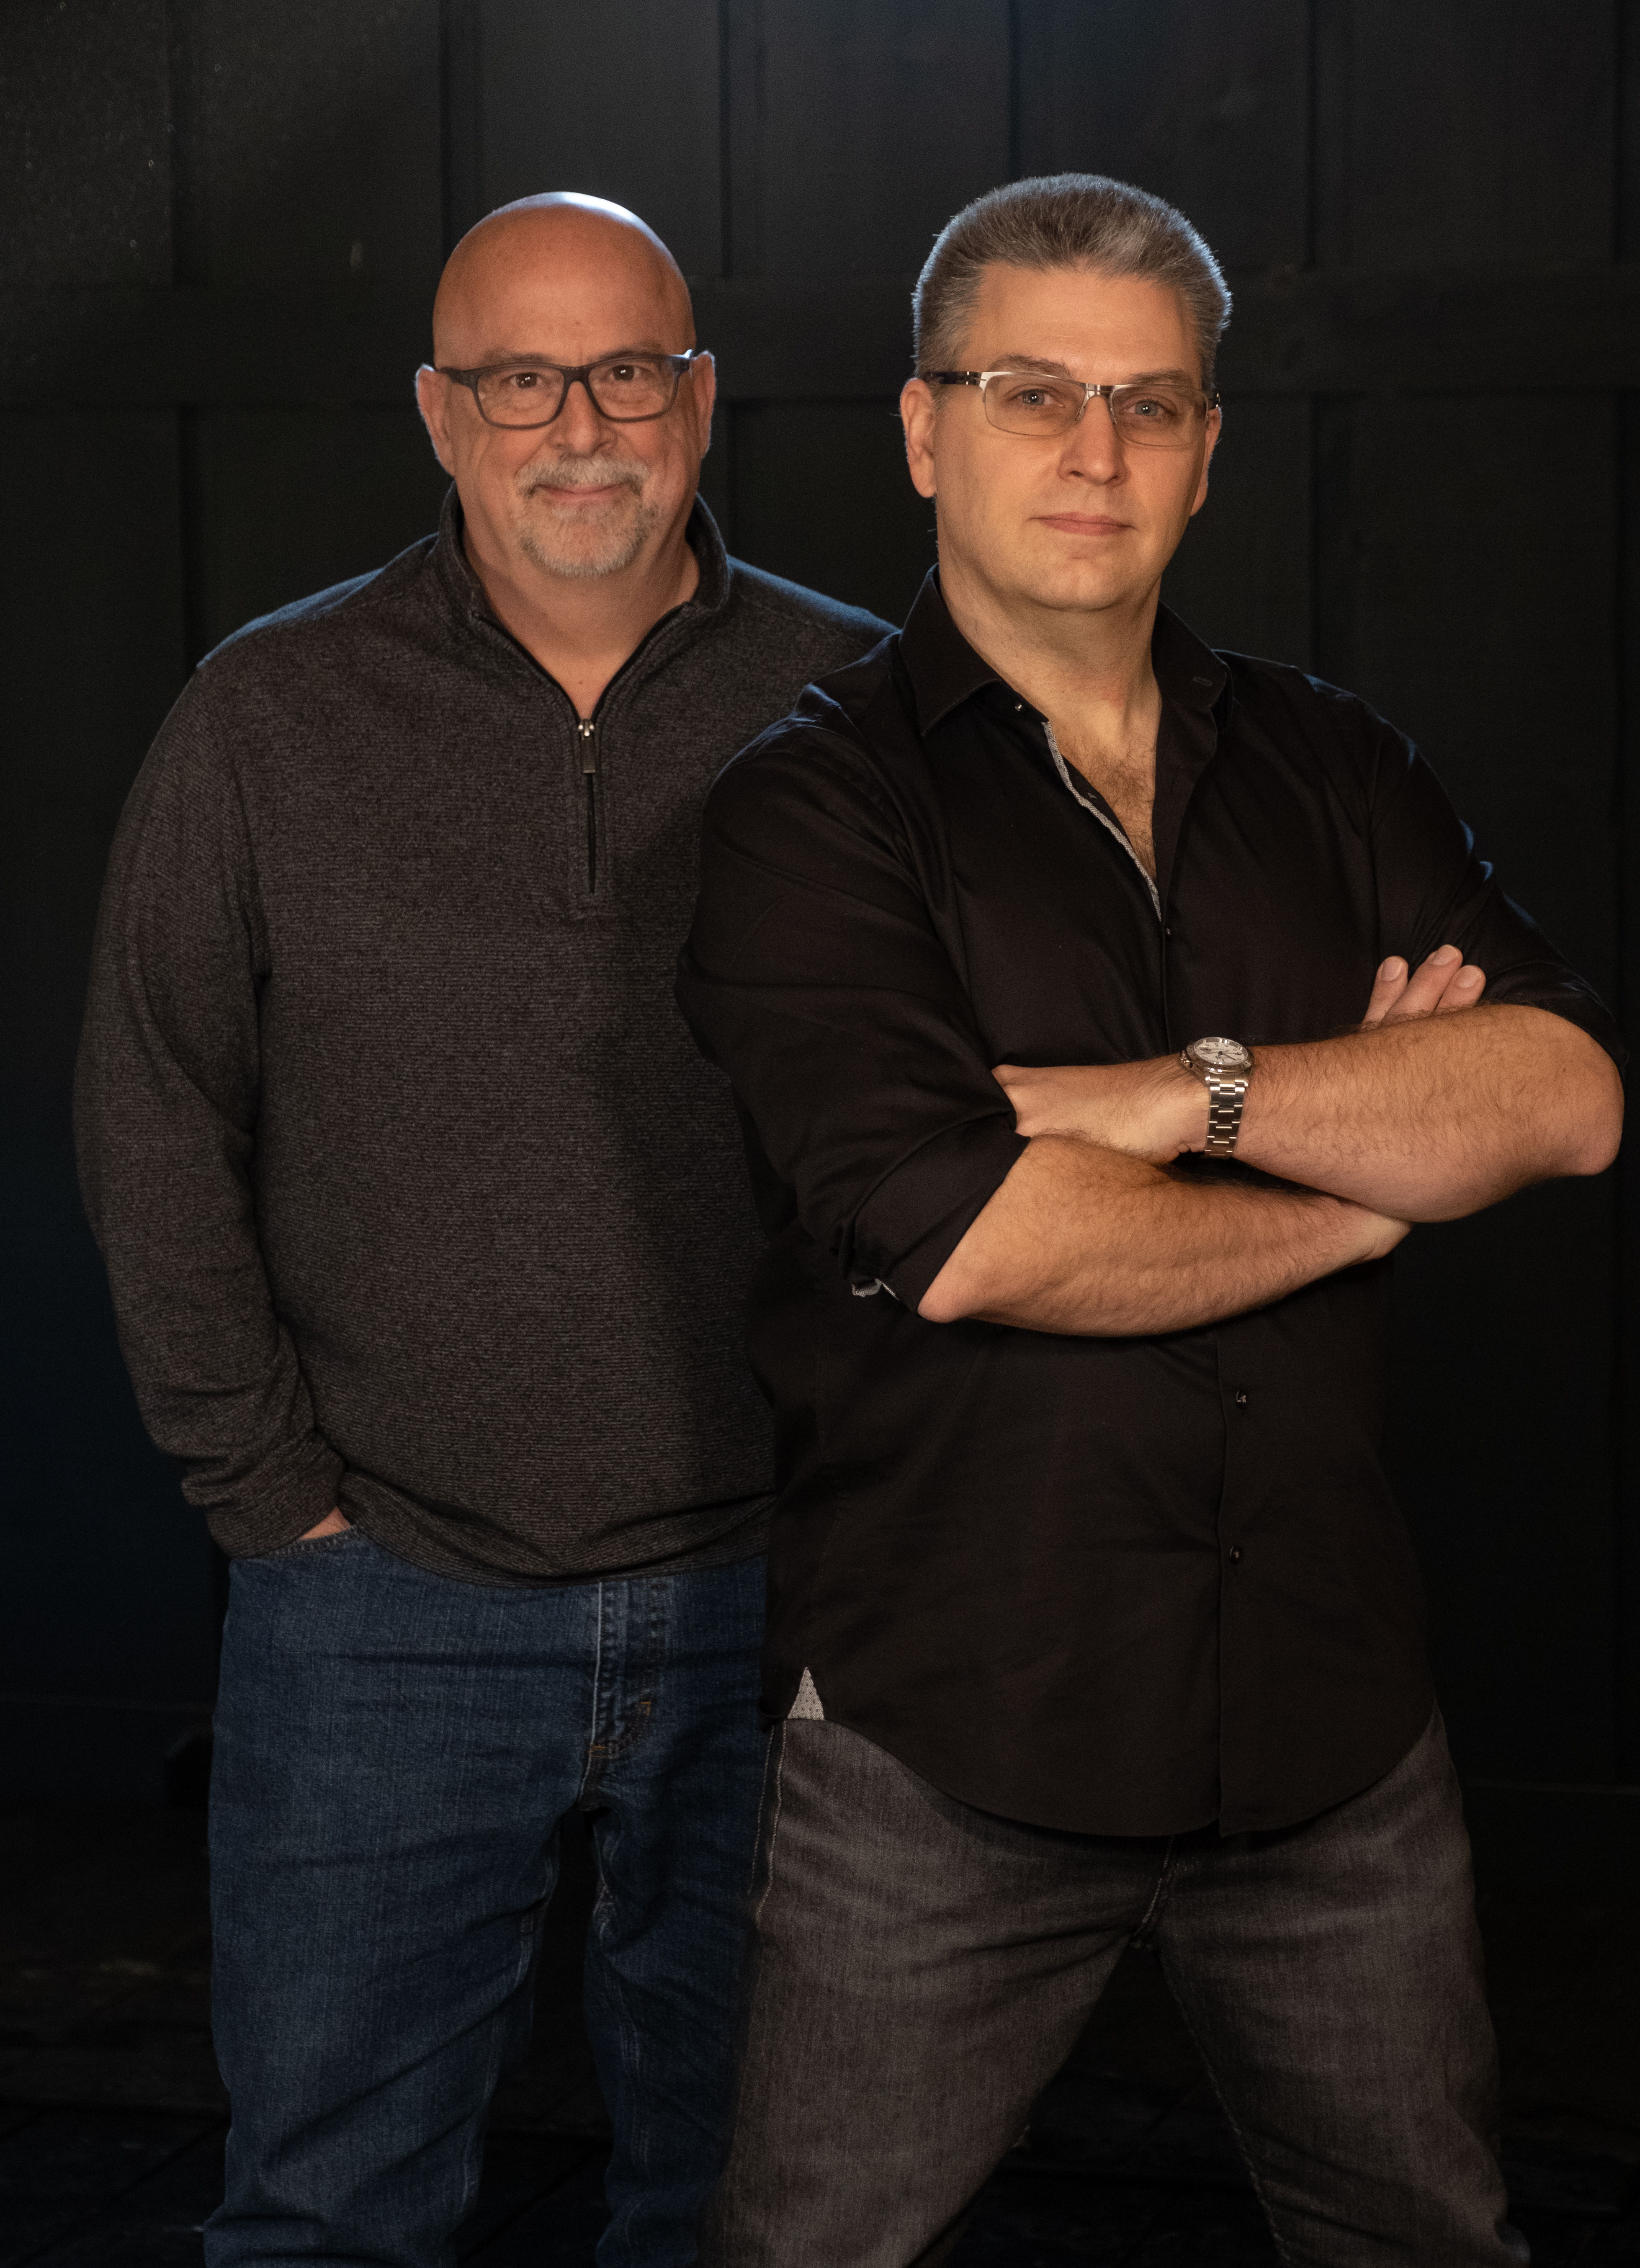 John Harris and Jody Elff partnered to form Harris-Elff Audio Resources (HEAR), which facilitated the use of the Gemini audio truck for the 94th Academy Awards and CMT Awards. Harris also mixed the CMT Awards live to air.